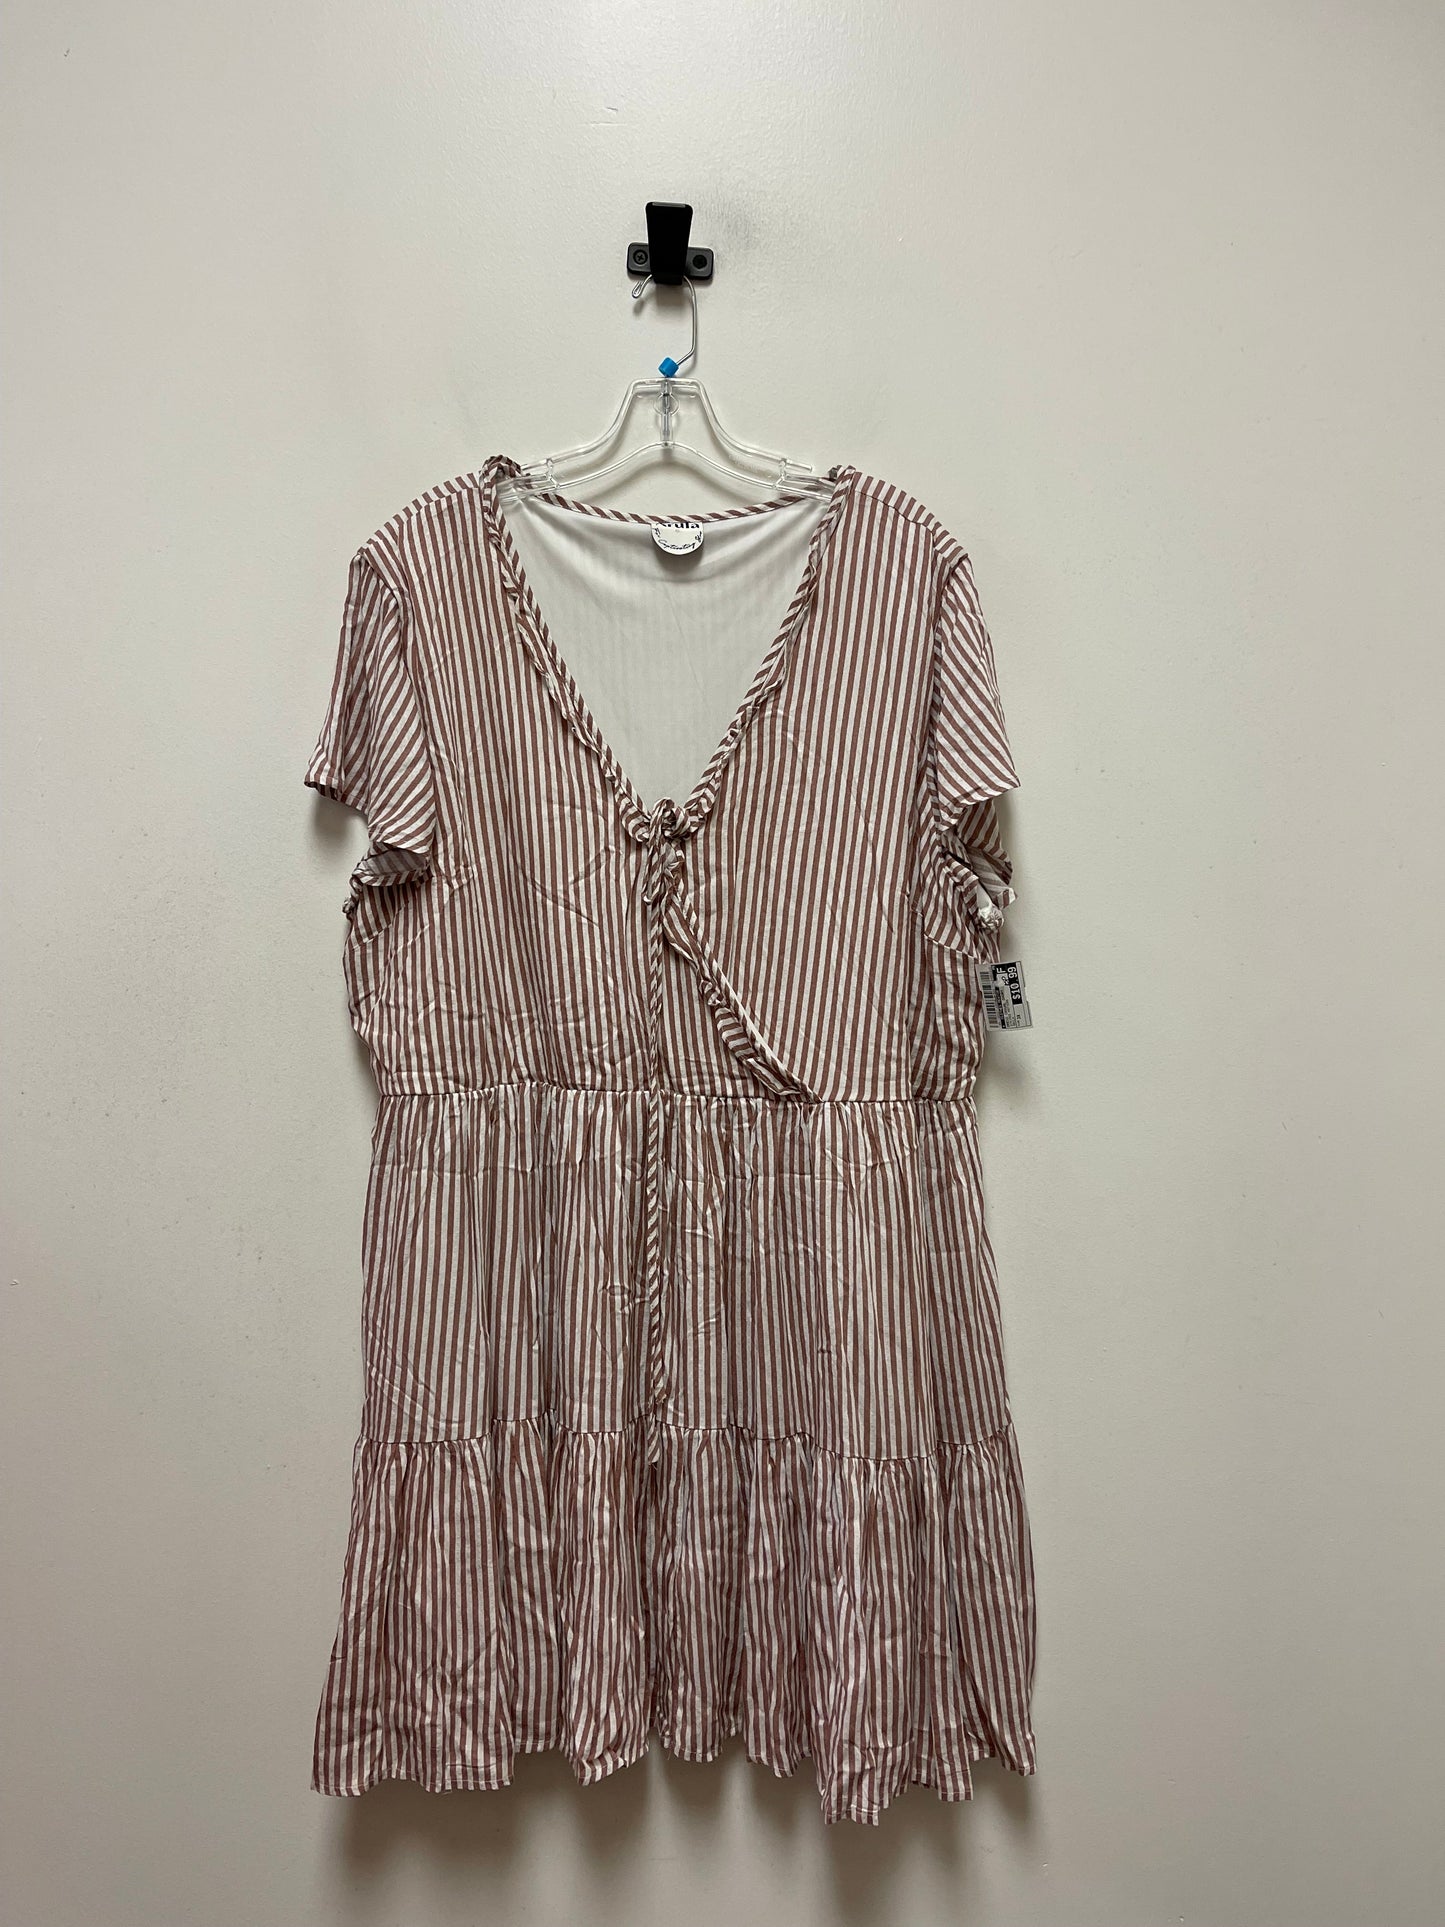 Striped Pattern Dress Casual Short Clothes Mentor, Size 3x